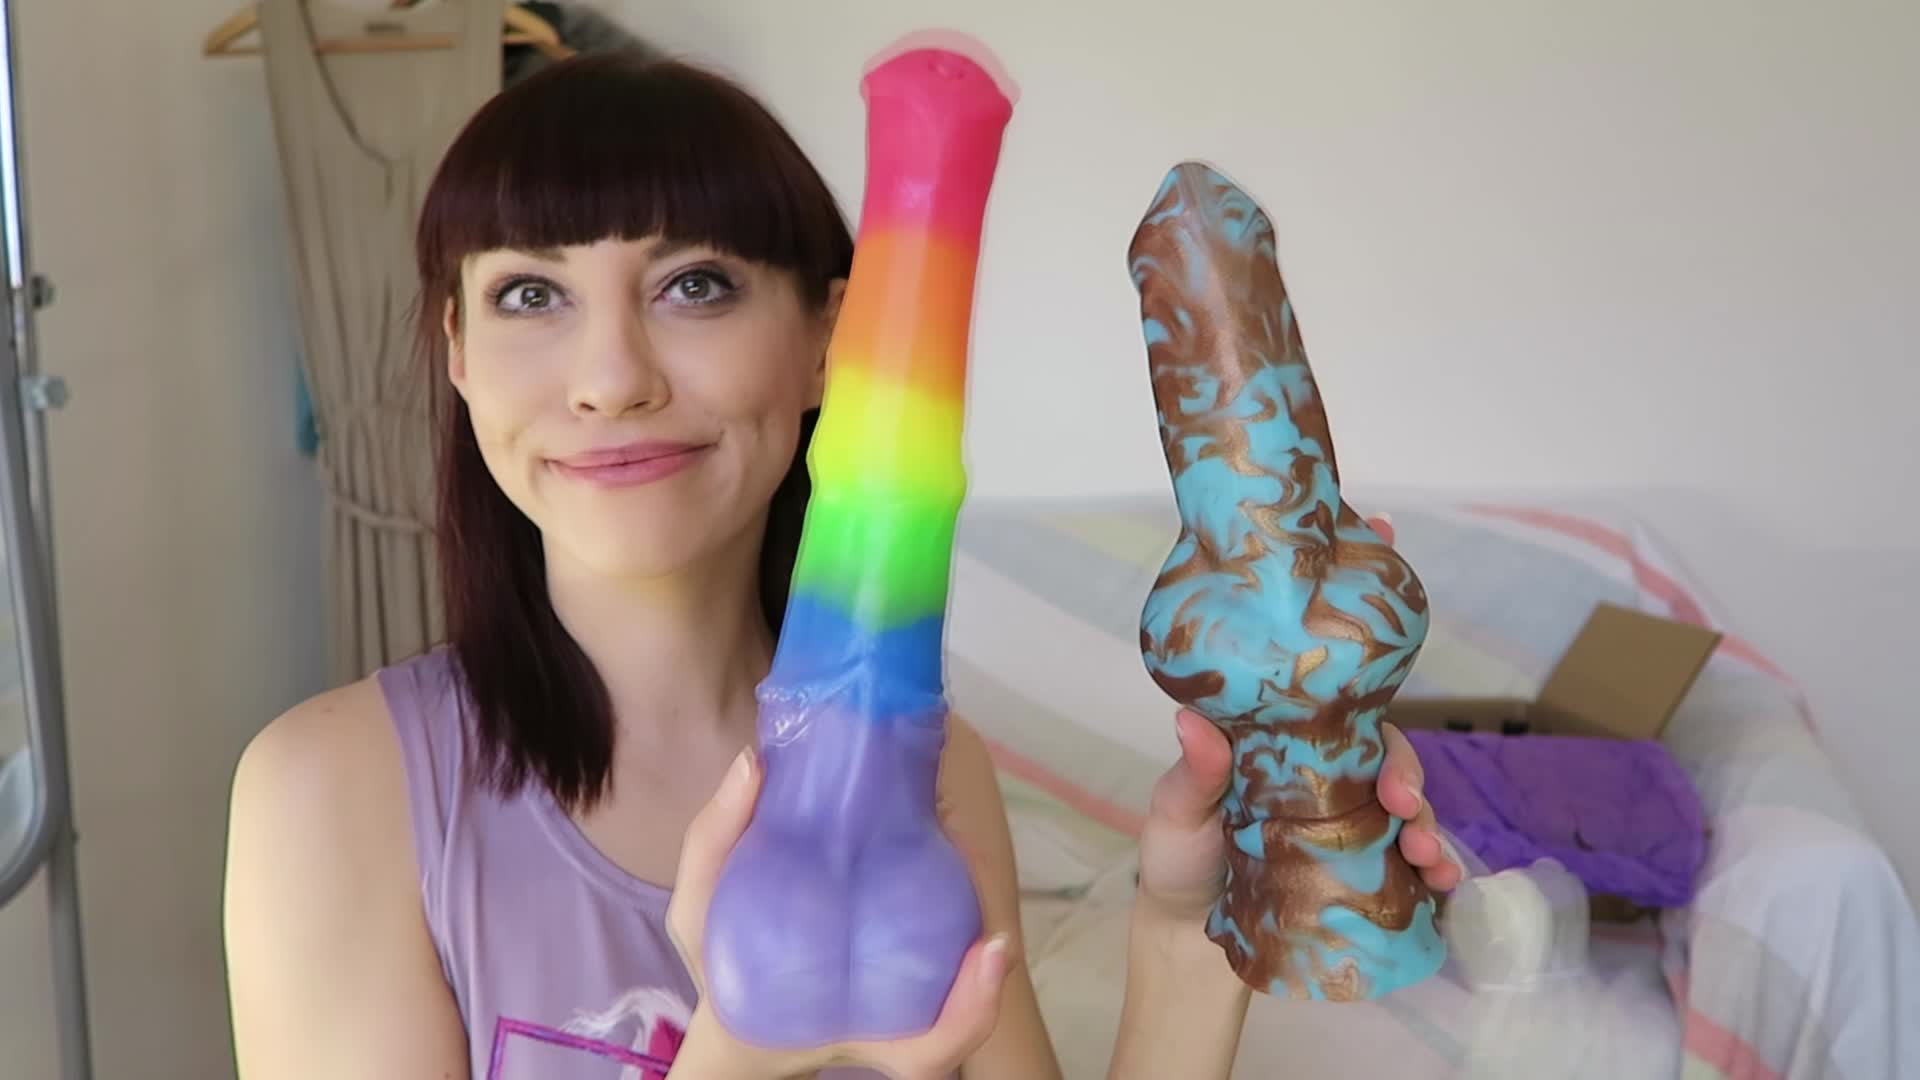 anatoliy fedorov recommends girls using bad dragon toys pic